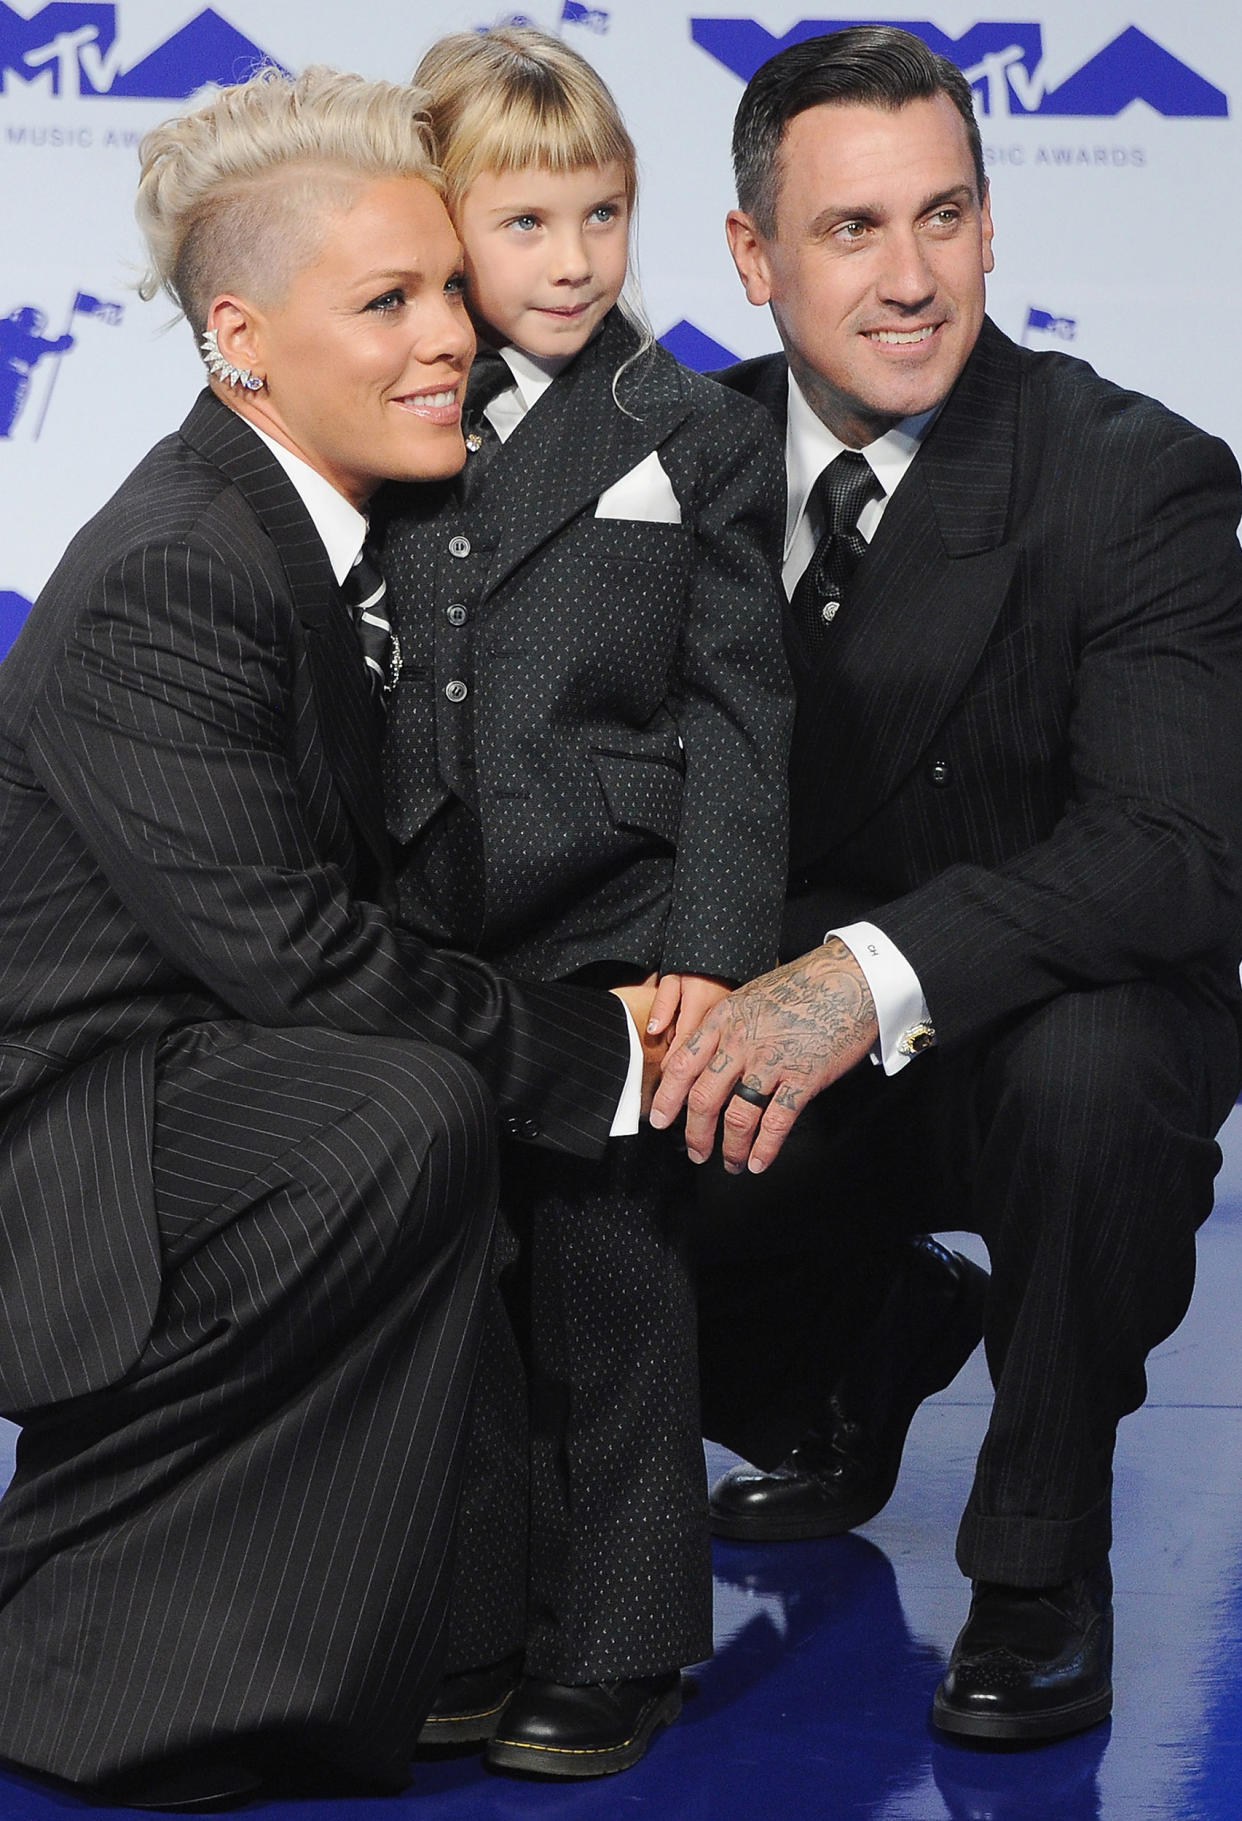 Eleven-year-old Willow (center) alongside her parents Pink and Carey Hart.  (Getty Images)